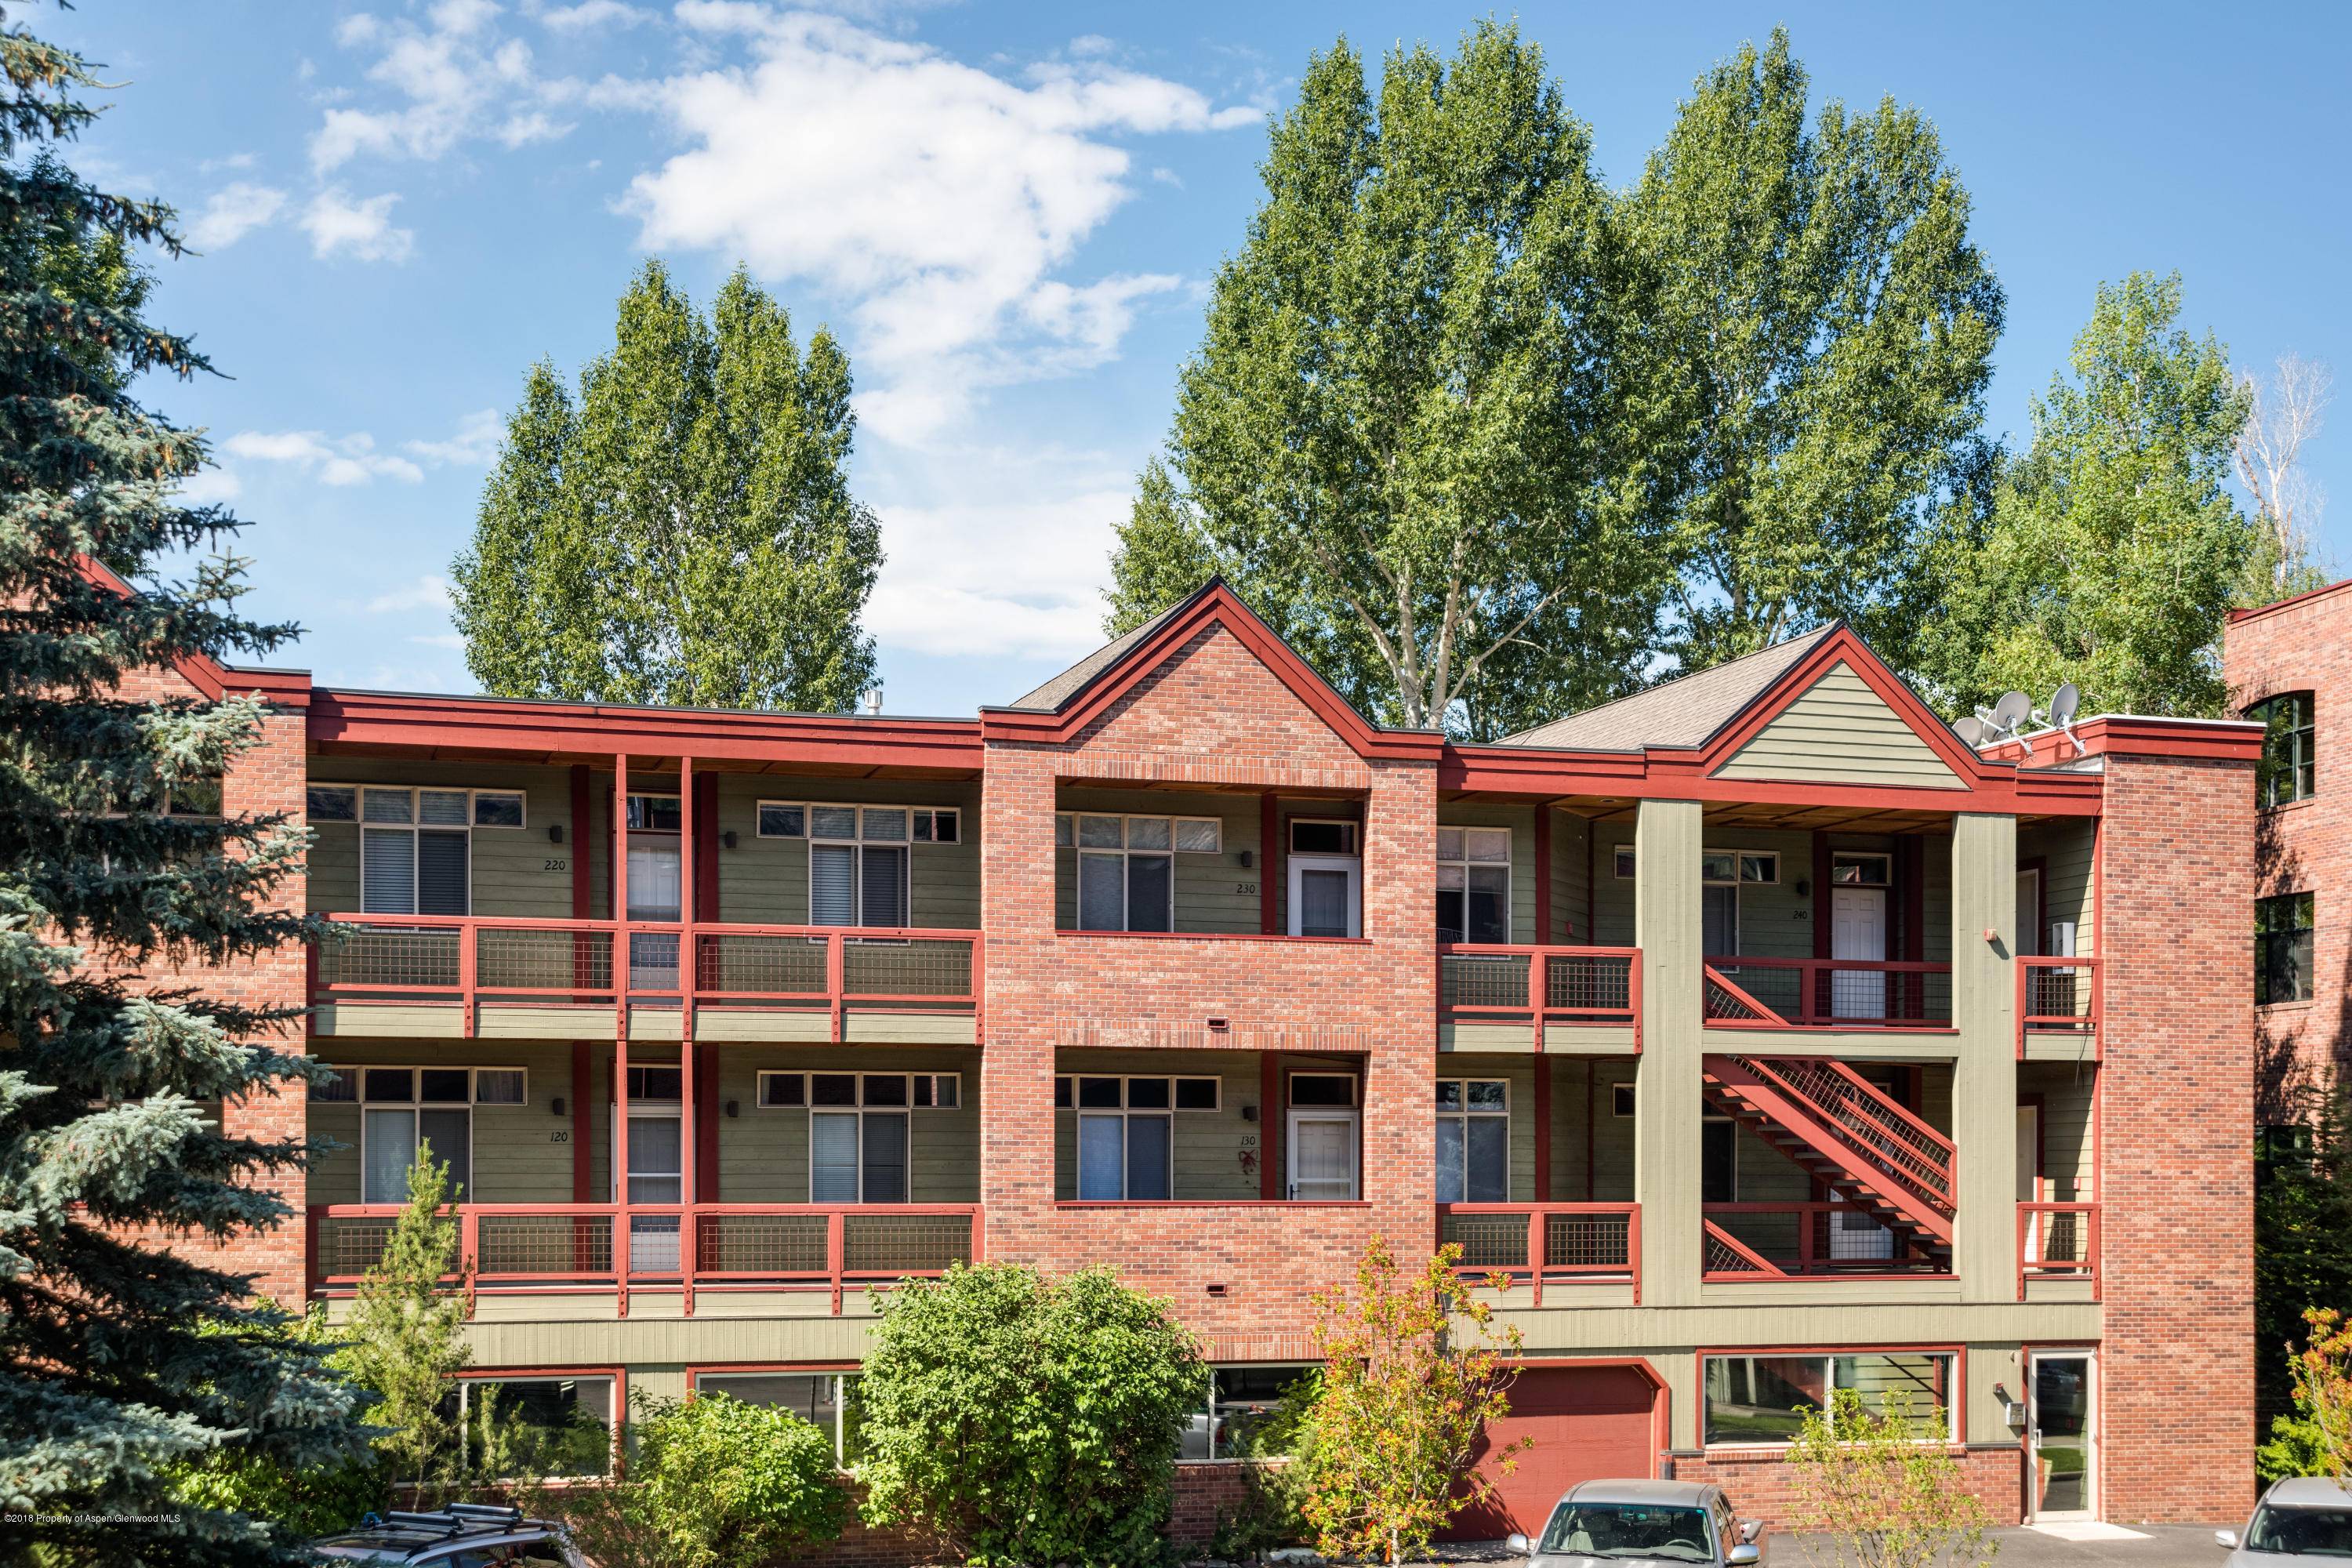 Top floor 2 bedroom 2 bath Riverfront condo walking distance to town and at the confluence of the Roaring Fork Frying Pan Gold Medal Rivers.